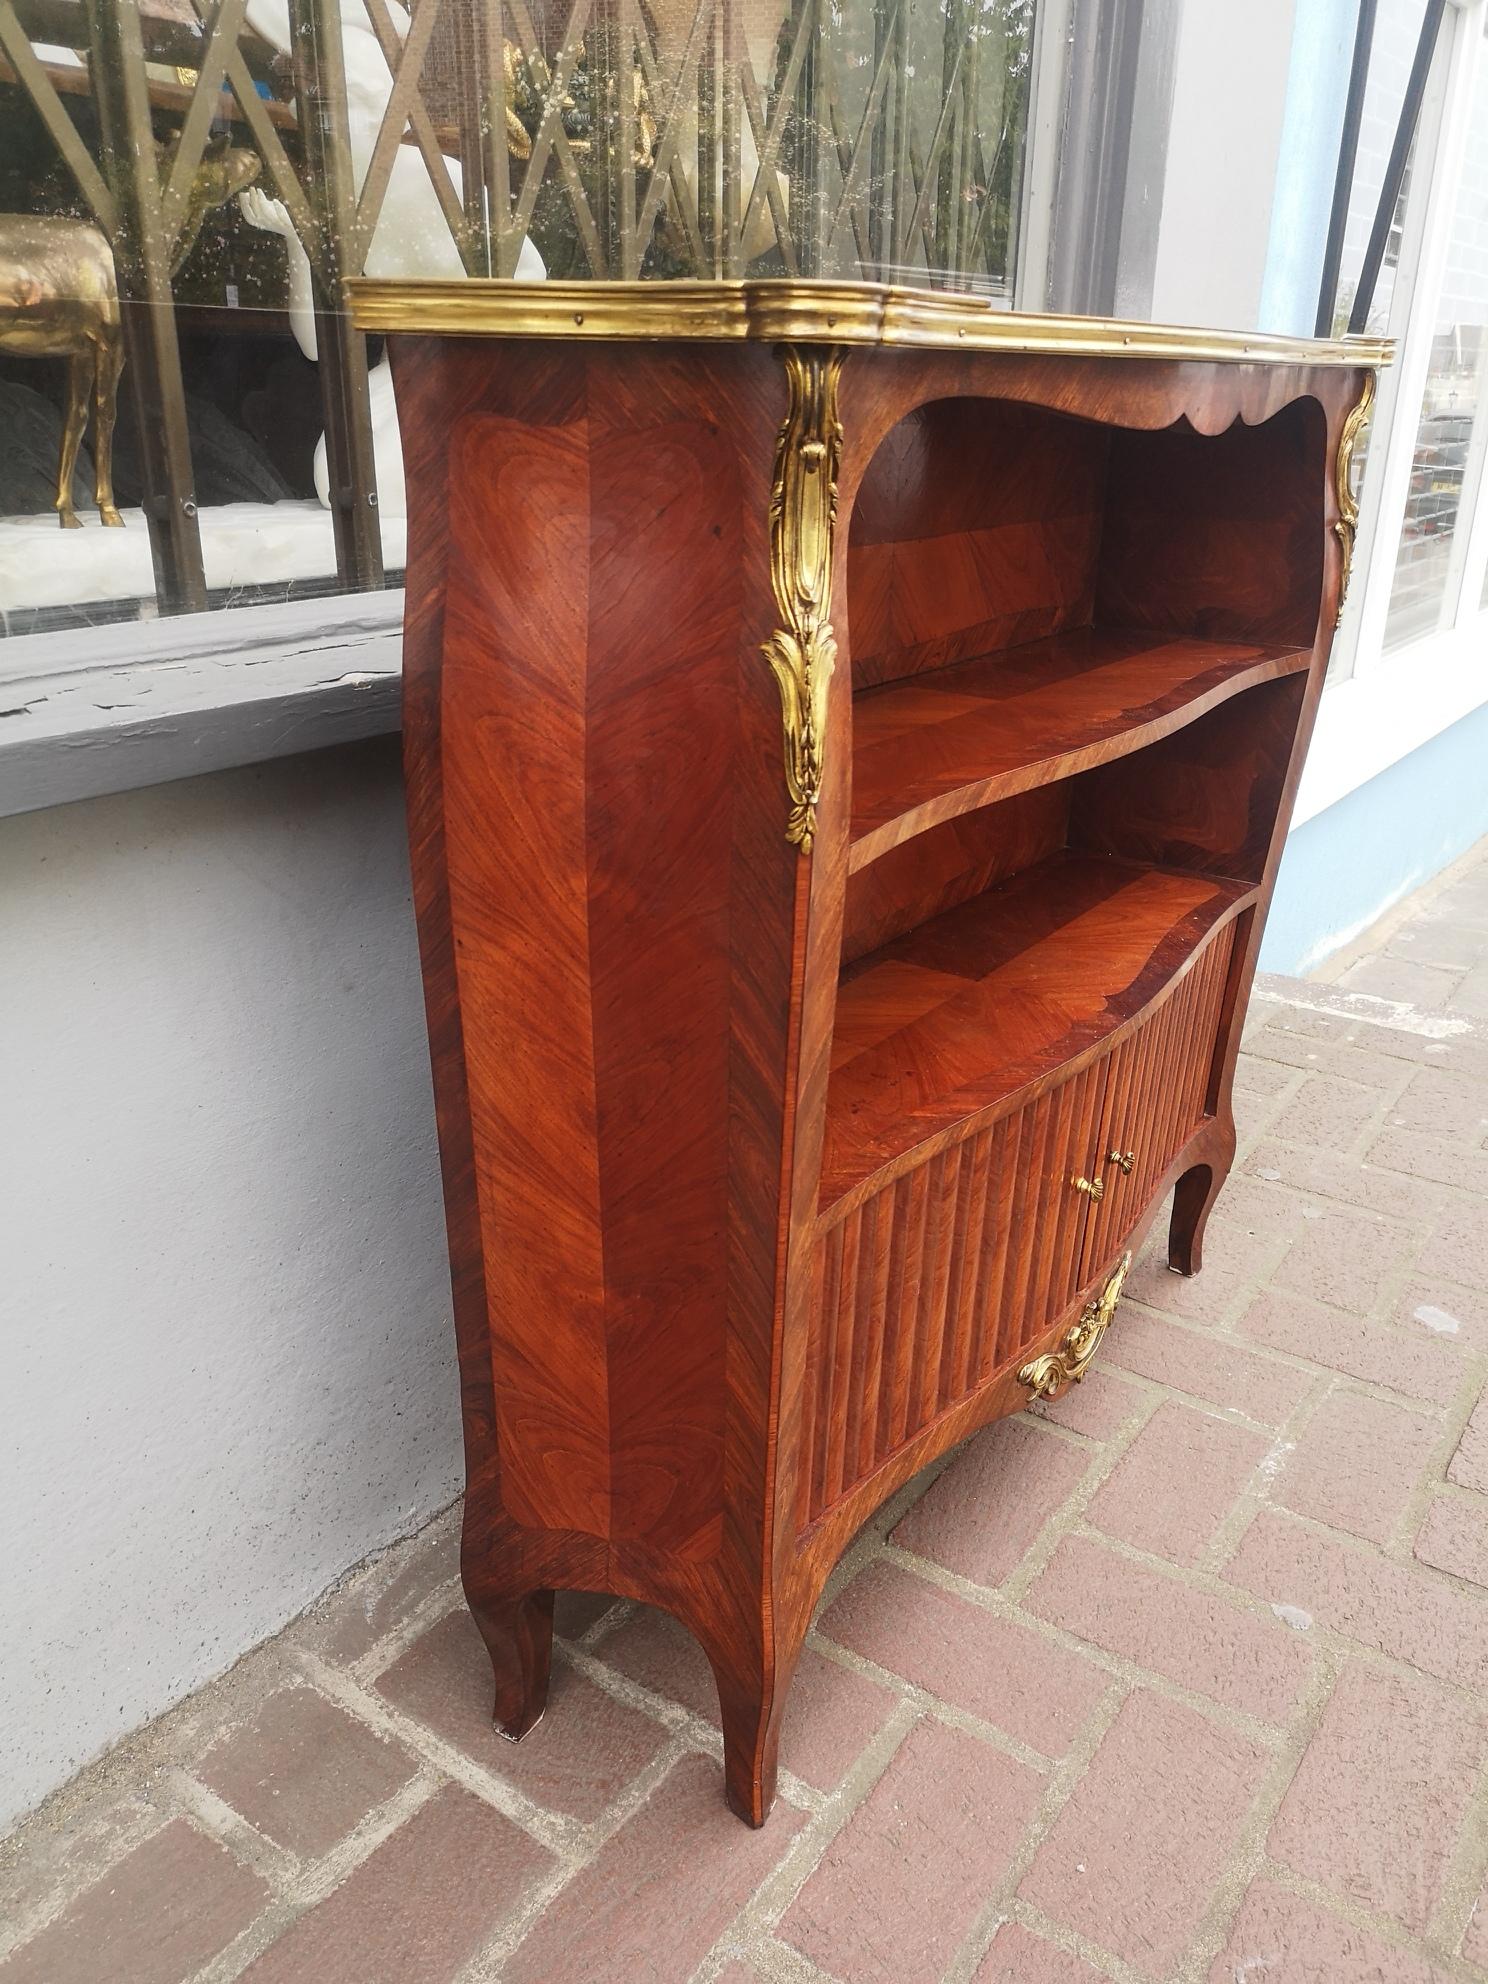 A good quality 19th century French mahogany bookcase, with two open shelves and a sliding tambour cupboard and bronze mounts. Of useful slender proportions.
Made by L'Escalier de crystal, a Parisian shop founded in 1804 and specialising in high end